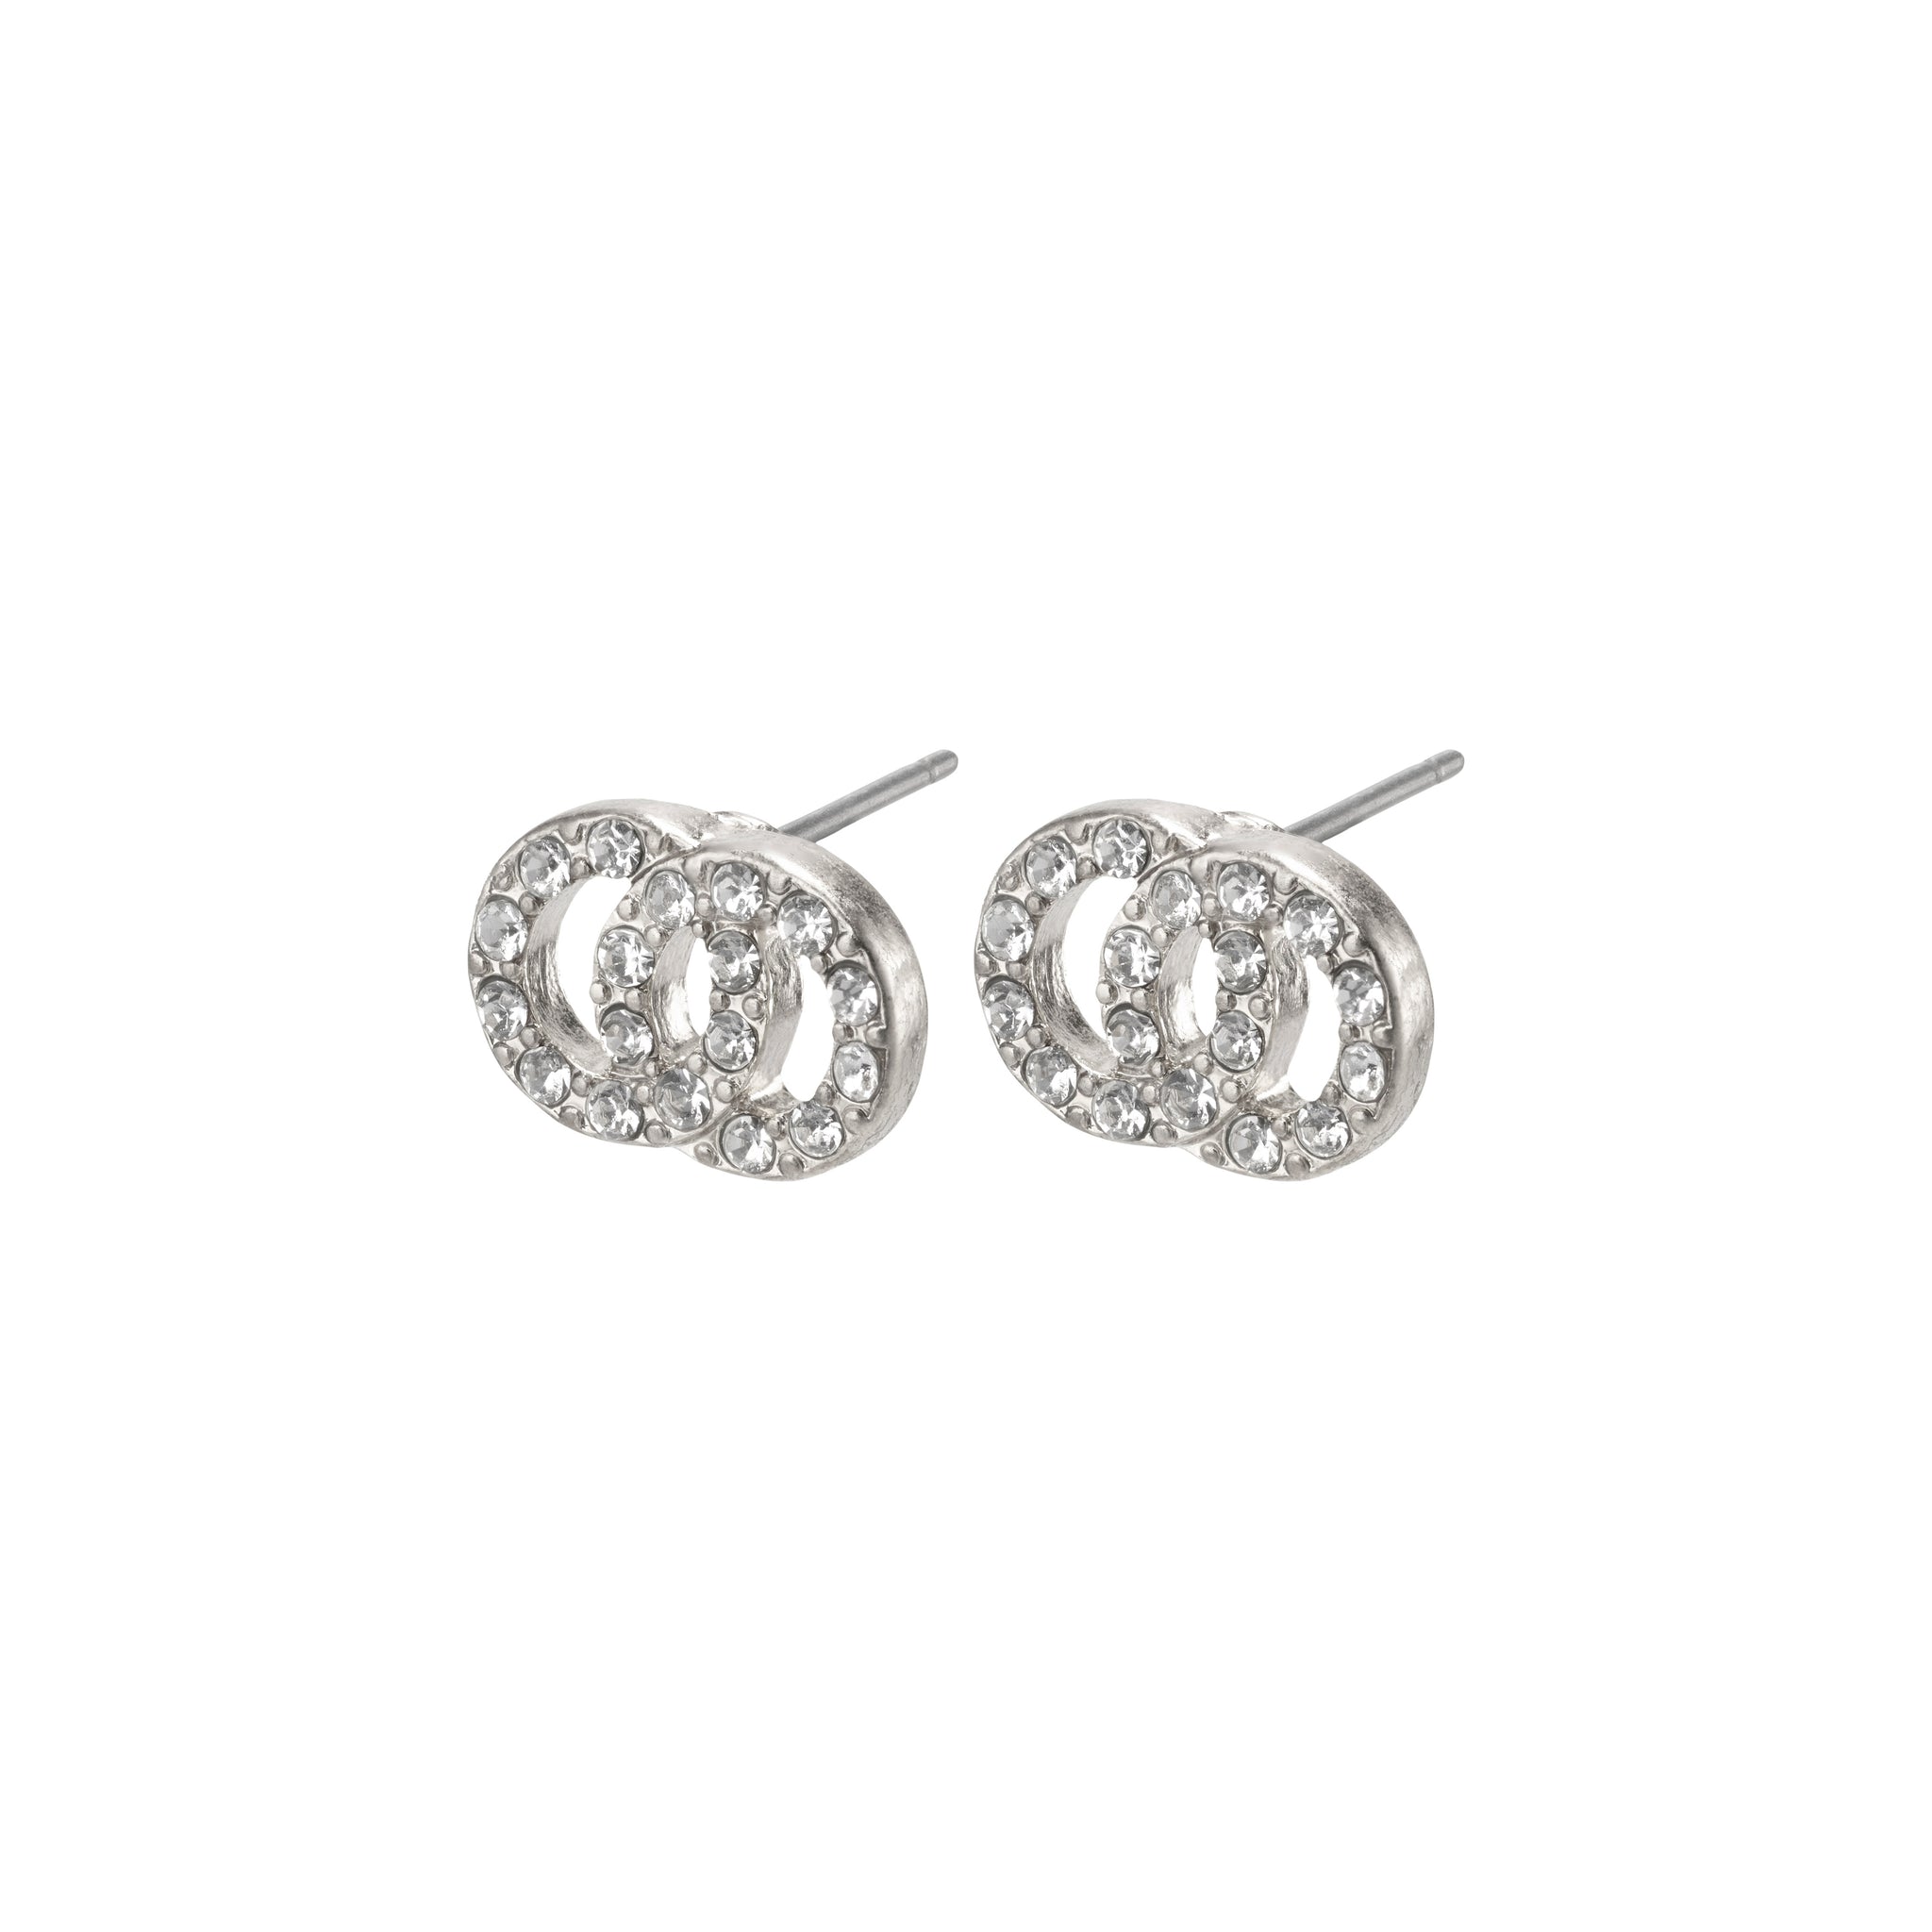 VICTORIA Recycled Crystal Earrings - Silver Plated